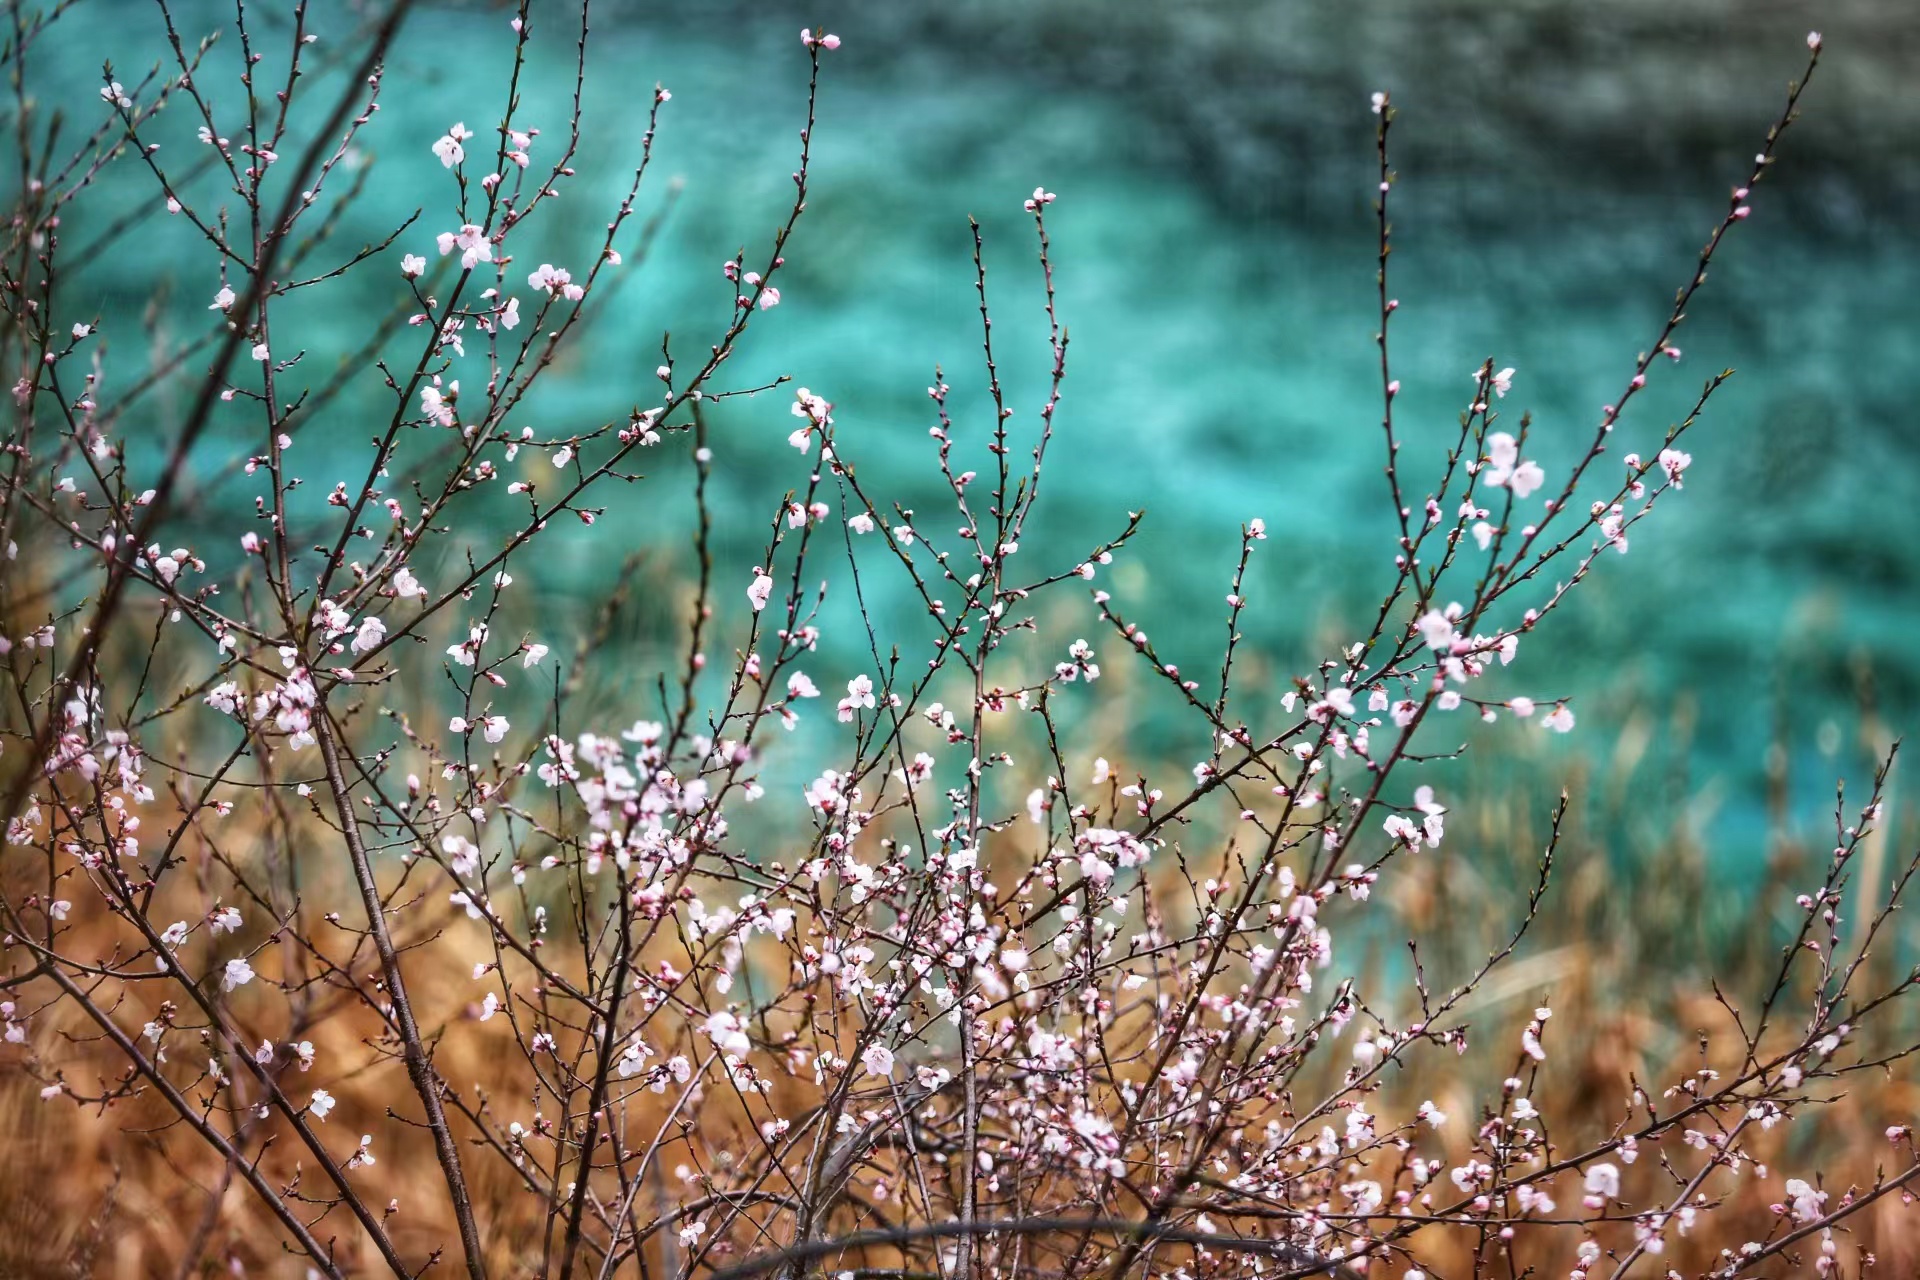 Peach flowers are spotted blossoming in Jiuzhaigou Valley, Sichuan Province. /Photo provided by Liu Langtao